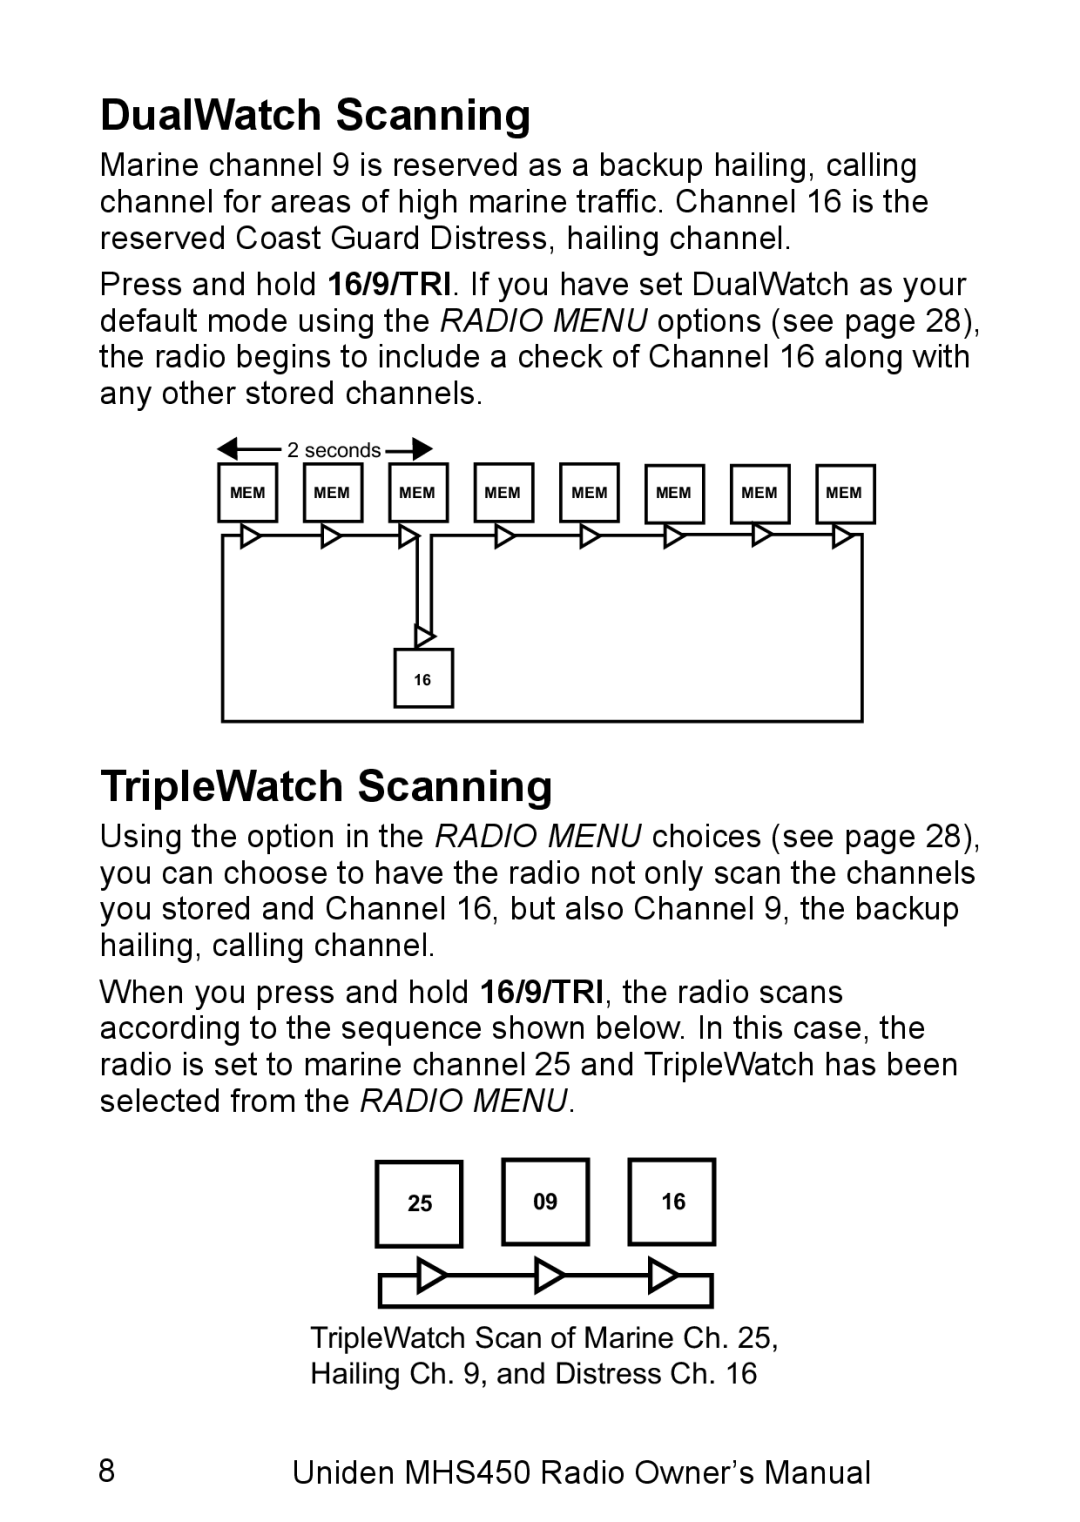 Uniden MHS450 owner manual DualWatch Scanning, TripleWatch Scanning 